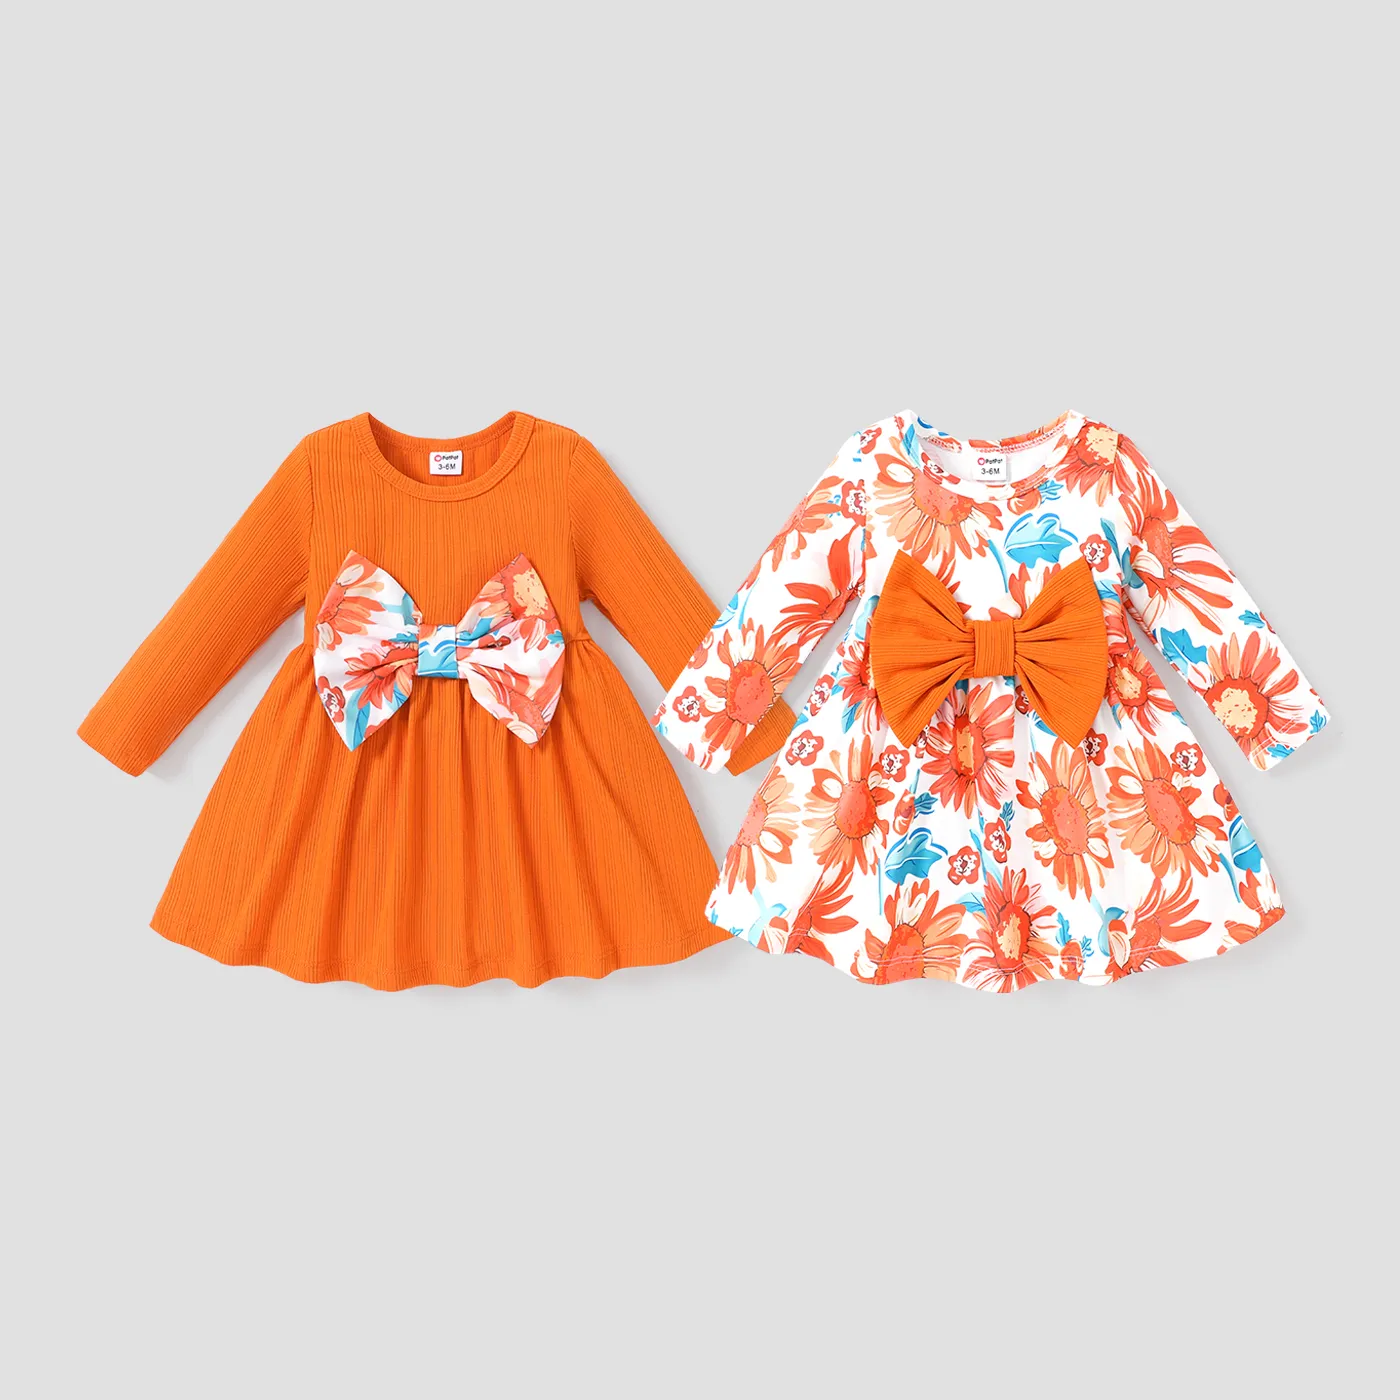 1 Pc Baby Girl Couleur Unie Et Allover Sunflower Print Bowknot Robe